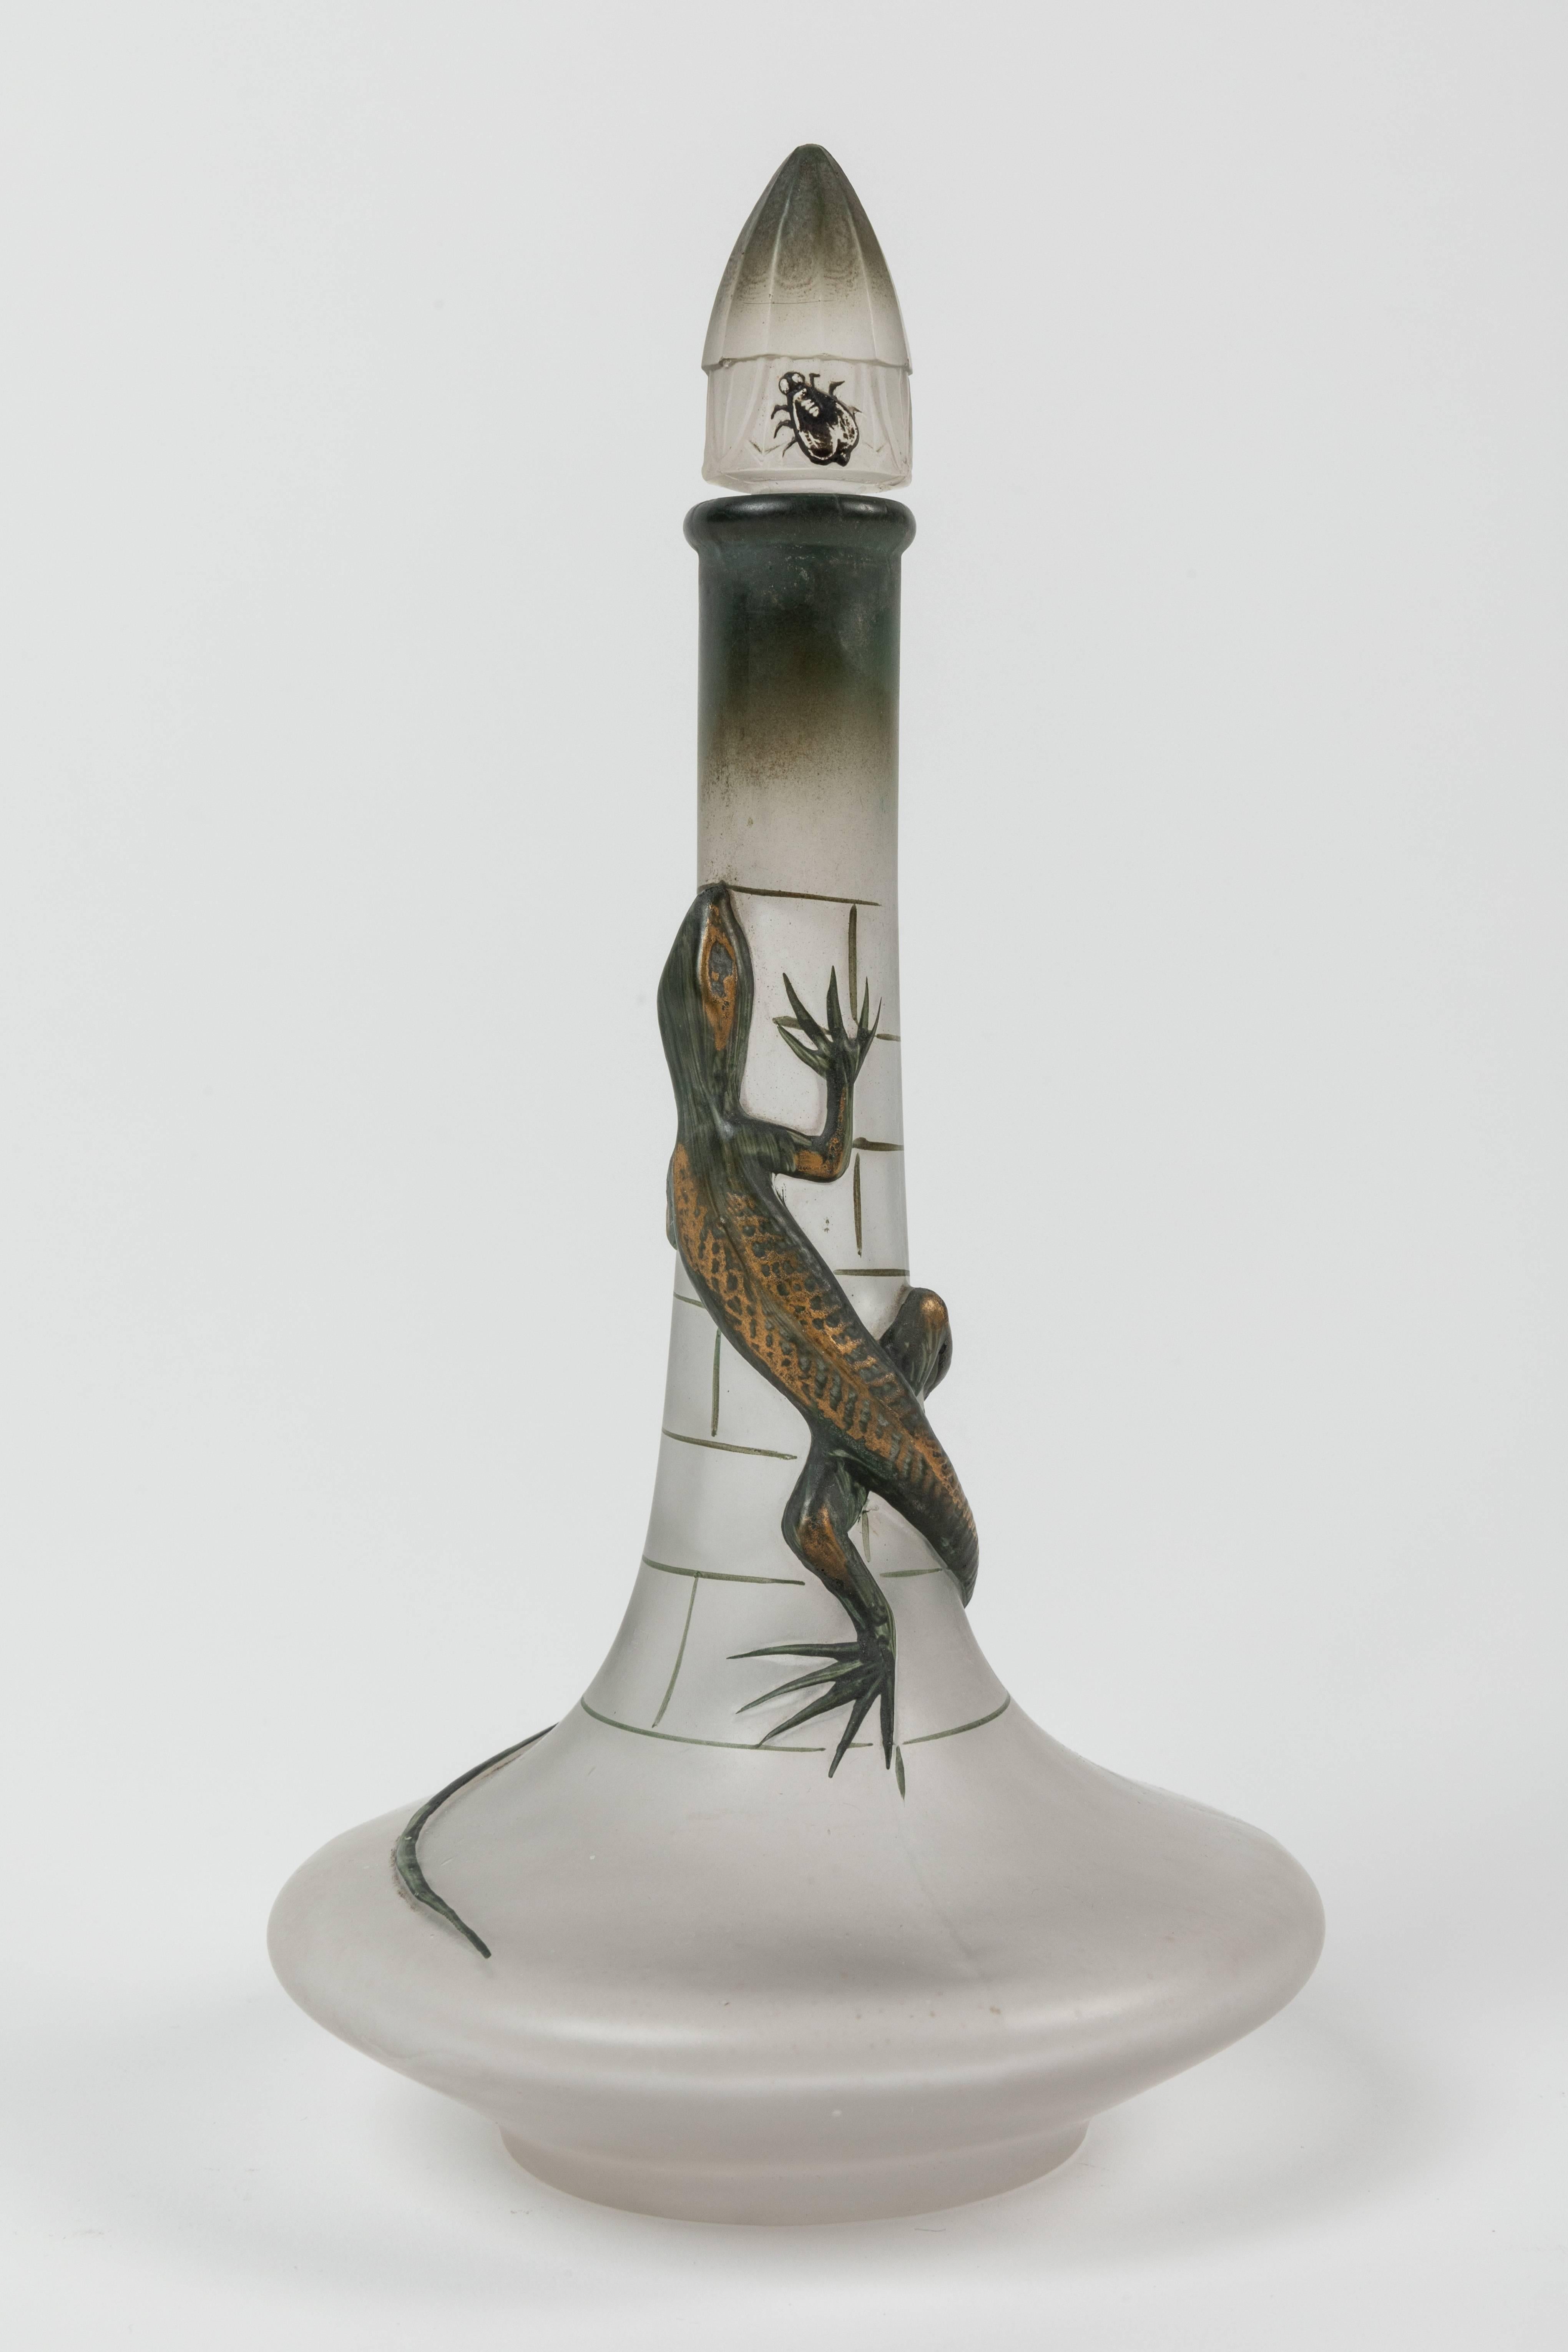 Perfume bottle in frosted clear glass with mounded design of a lizard wrapped around the long stem of the bottle hunting a fly resting on the cap. Designed by Maurice Depinoix in 1912, France. This bottle produced for Lubin's 